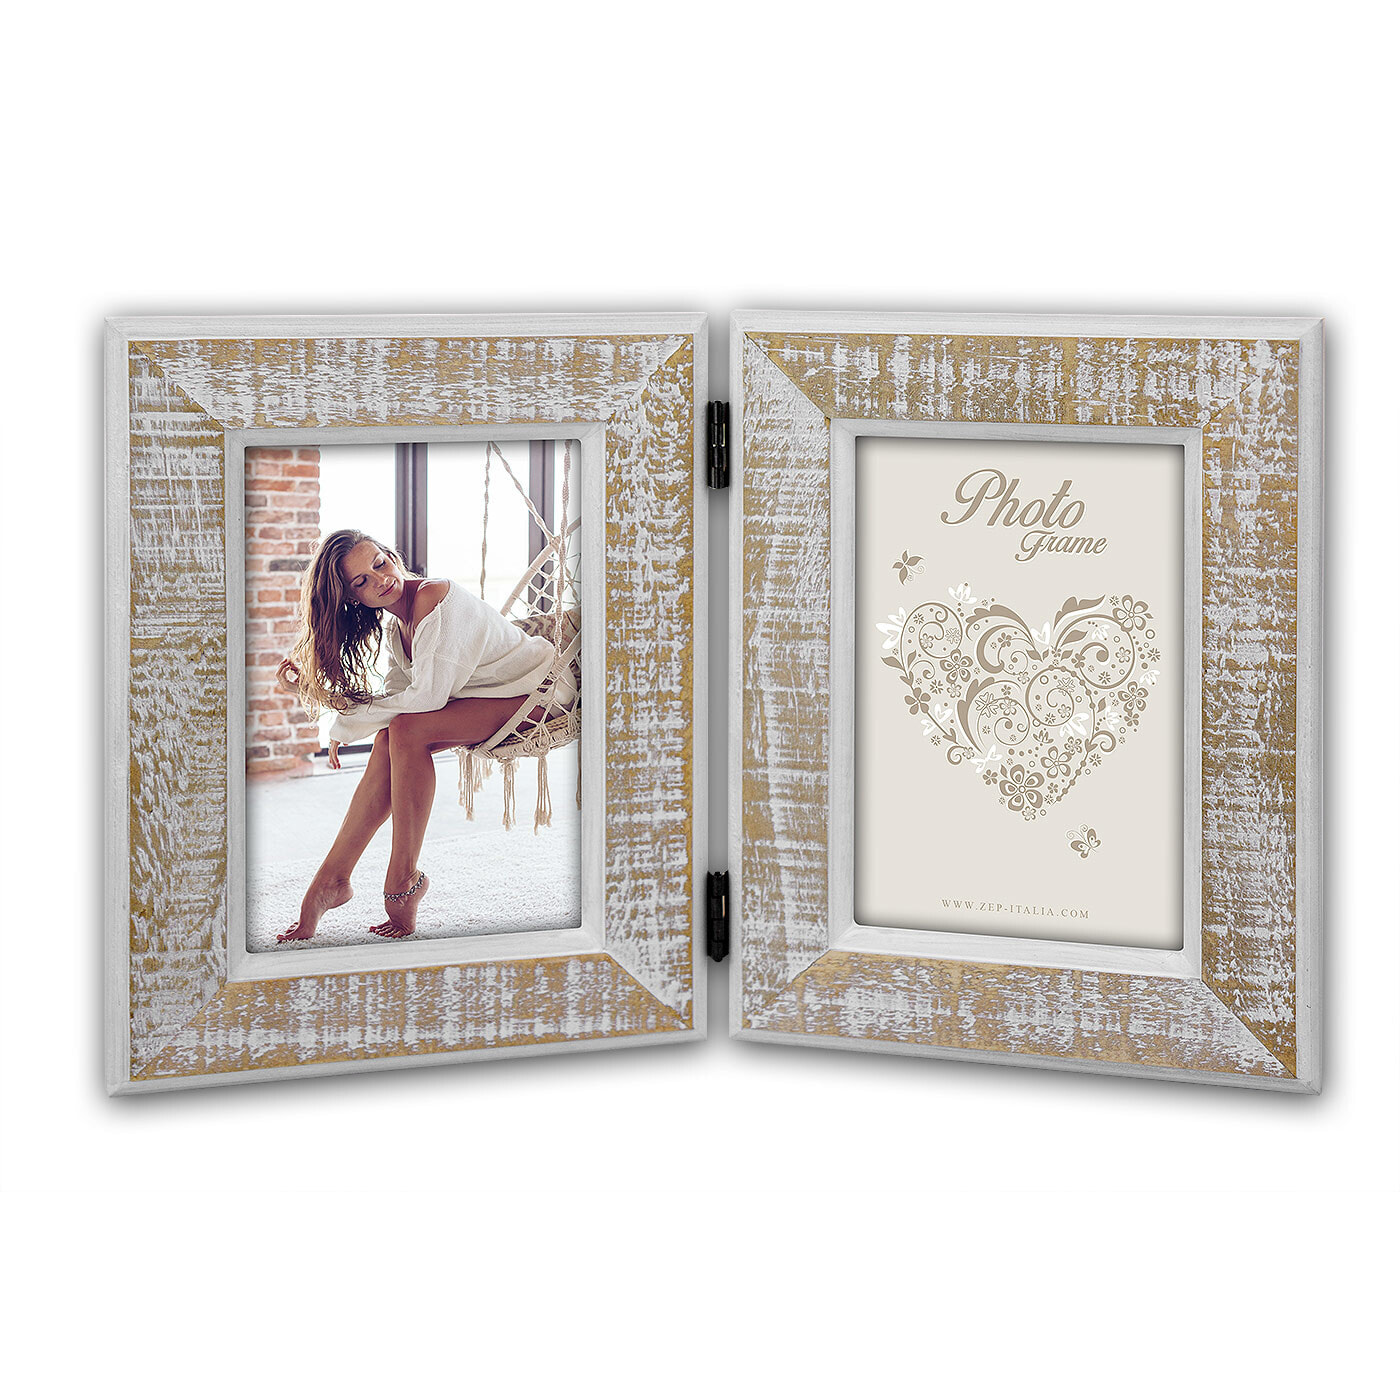 Zep Levico 2Q - Wood - Natural - White - Picture frame set - Table - 13 x 18 cm - Rectangular